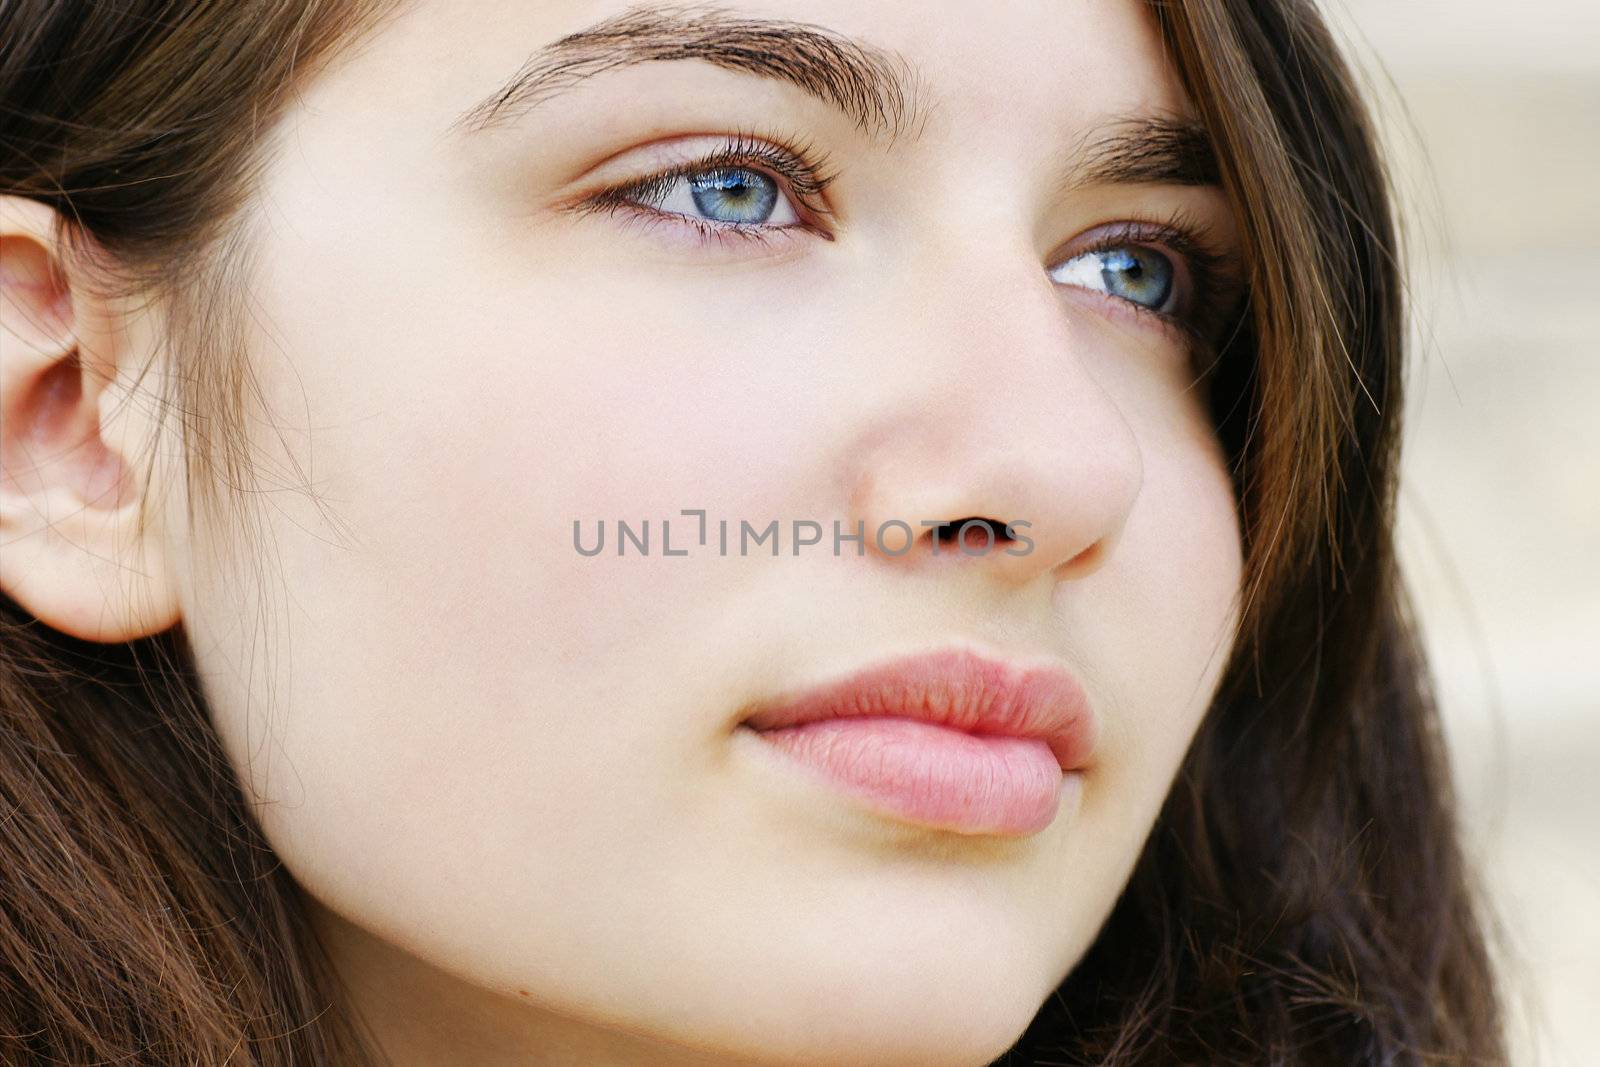 Portrait of s beautiful hopeful or pensive young woman with fair skin and light blue and green eyes, simple and natural.